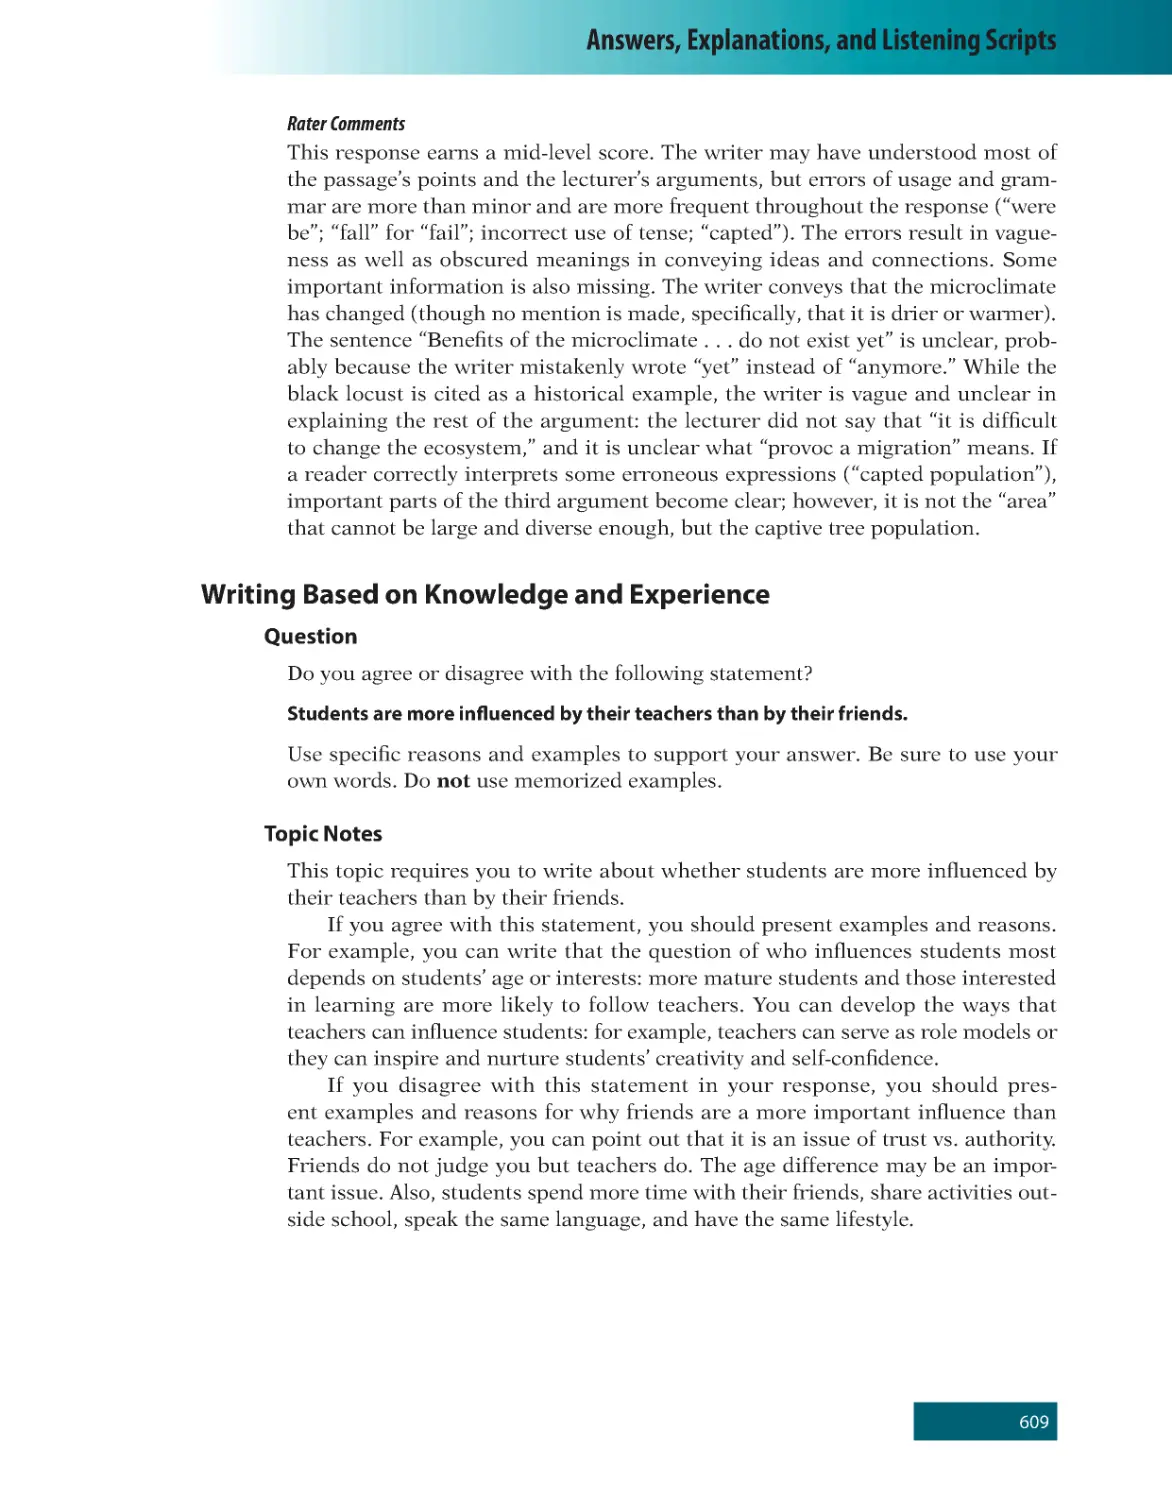 Writing Based on Knowledge and Experience
Topic Notes